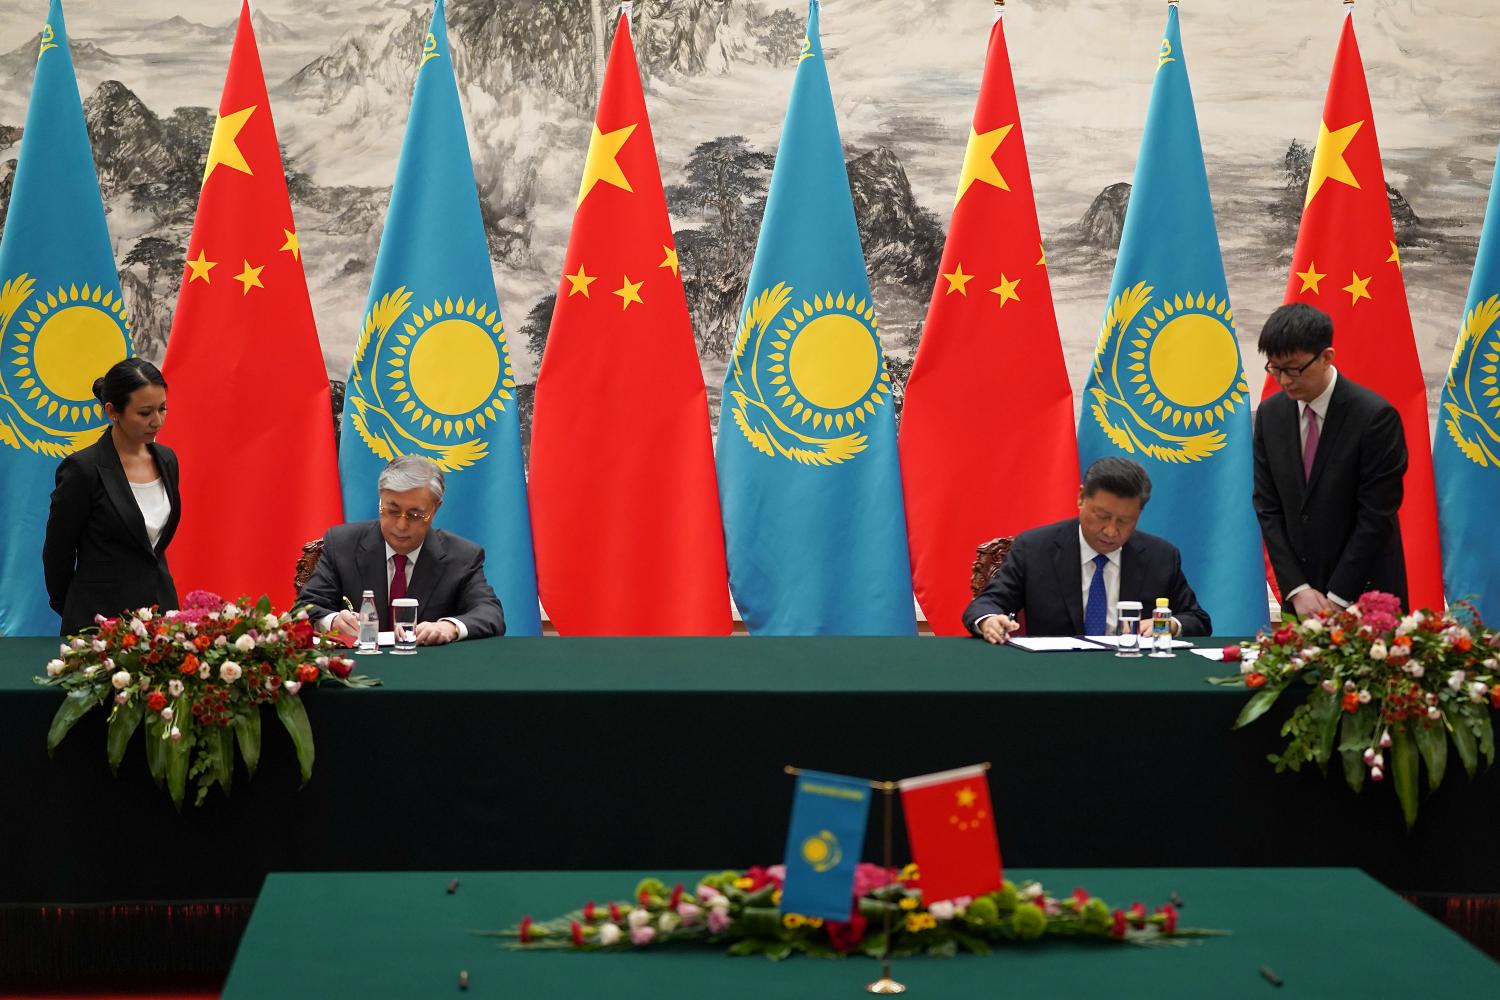 Chinese President Xi Jinping and Kazakh President Kassym-Jomart Tokayev sign documents during the signing ceremony, at the Great Hall of the People, Beijing, China  September 11, 2019 Andrea Verdelli/ Pool via REUTERS   *** Local Caption *** BEIJING, CHINA - SEPTEMBER 11: Kazakh President Kassym Jomart Tokayev talks to Chinese President Xi Jinping (not pictured) during the meeting on September 11, 2019 at the Great Hall of the People, Beijing, China. (Photo by Andrea Verdelli/Pool/Getty Images